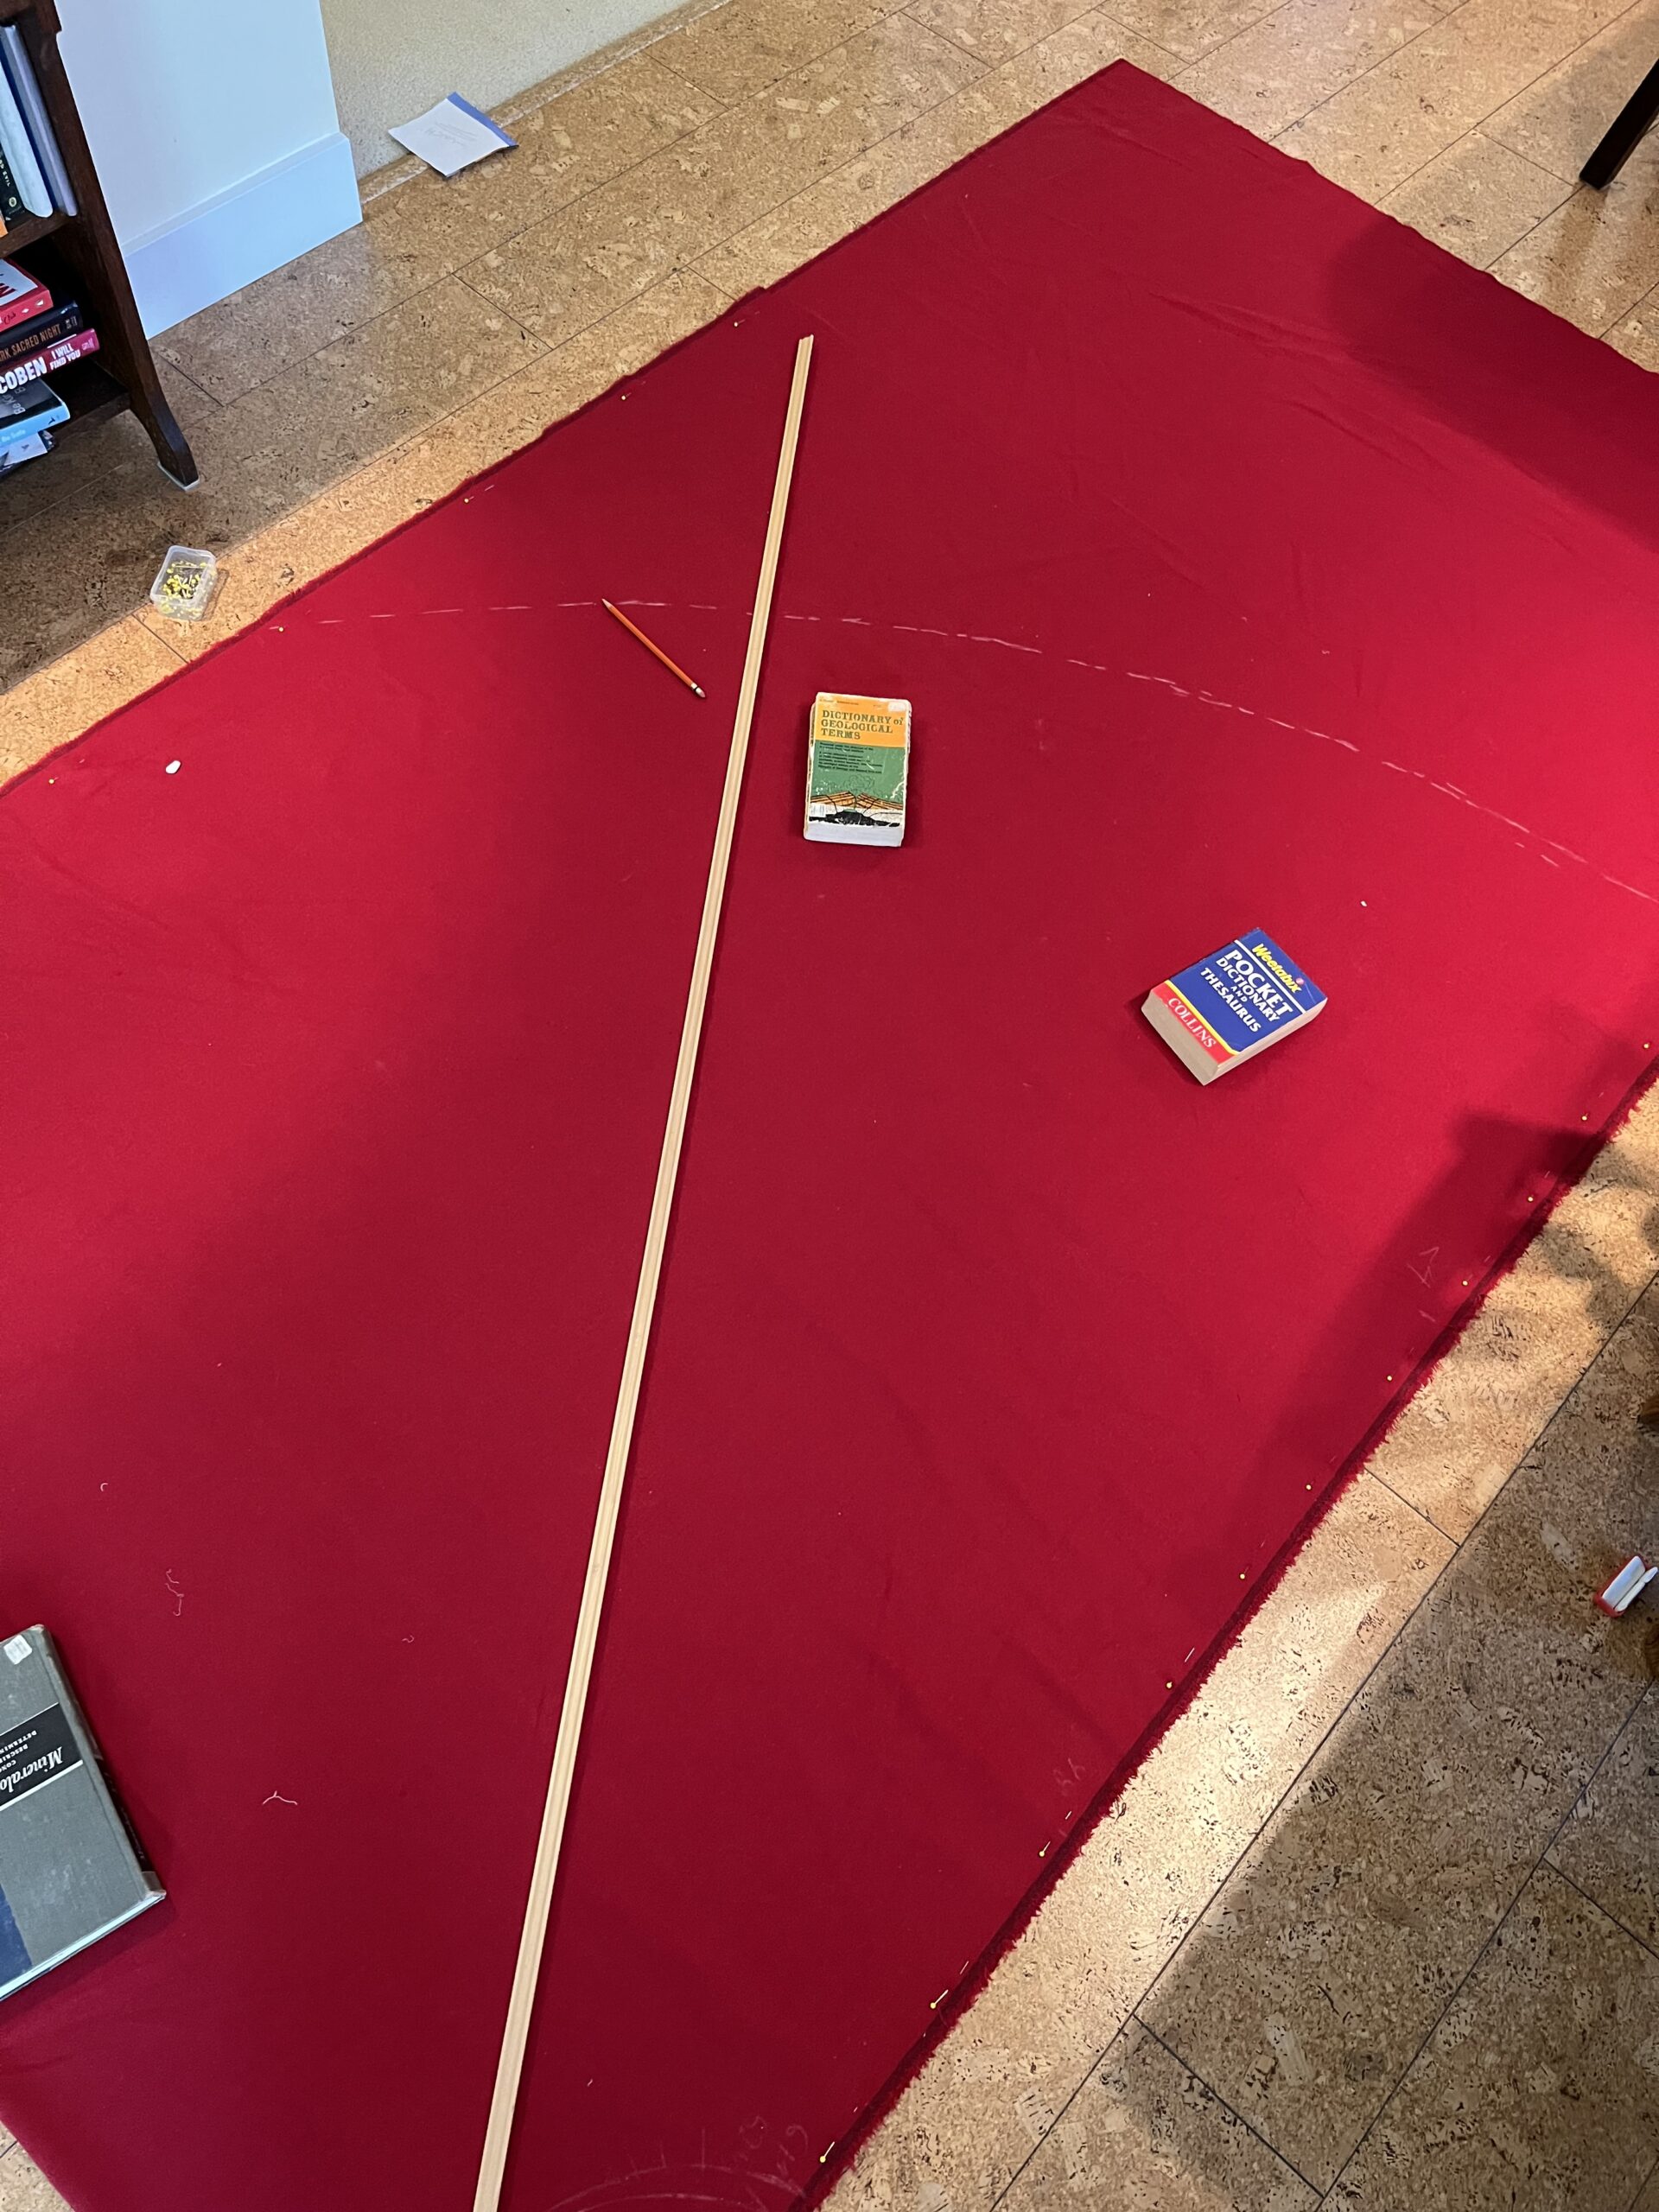 A long stick traces out a curve on a length of red wool